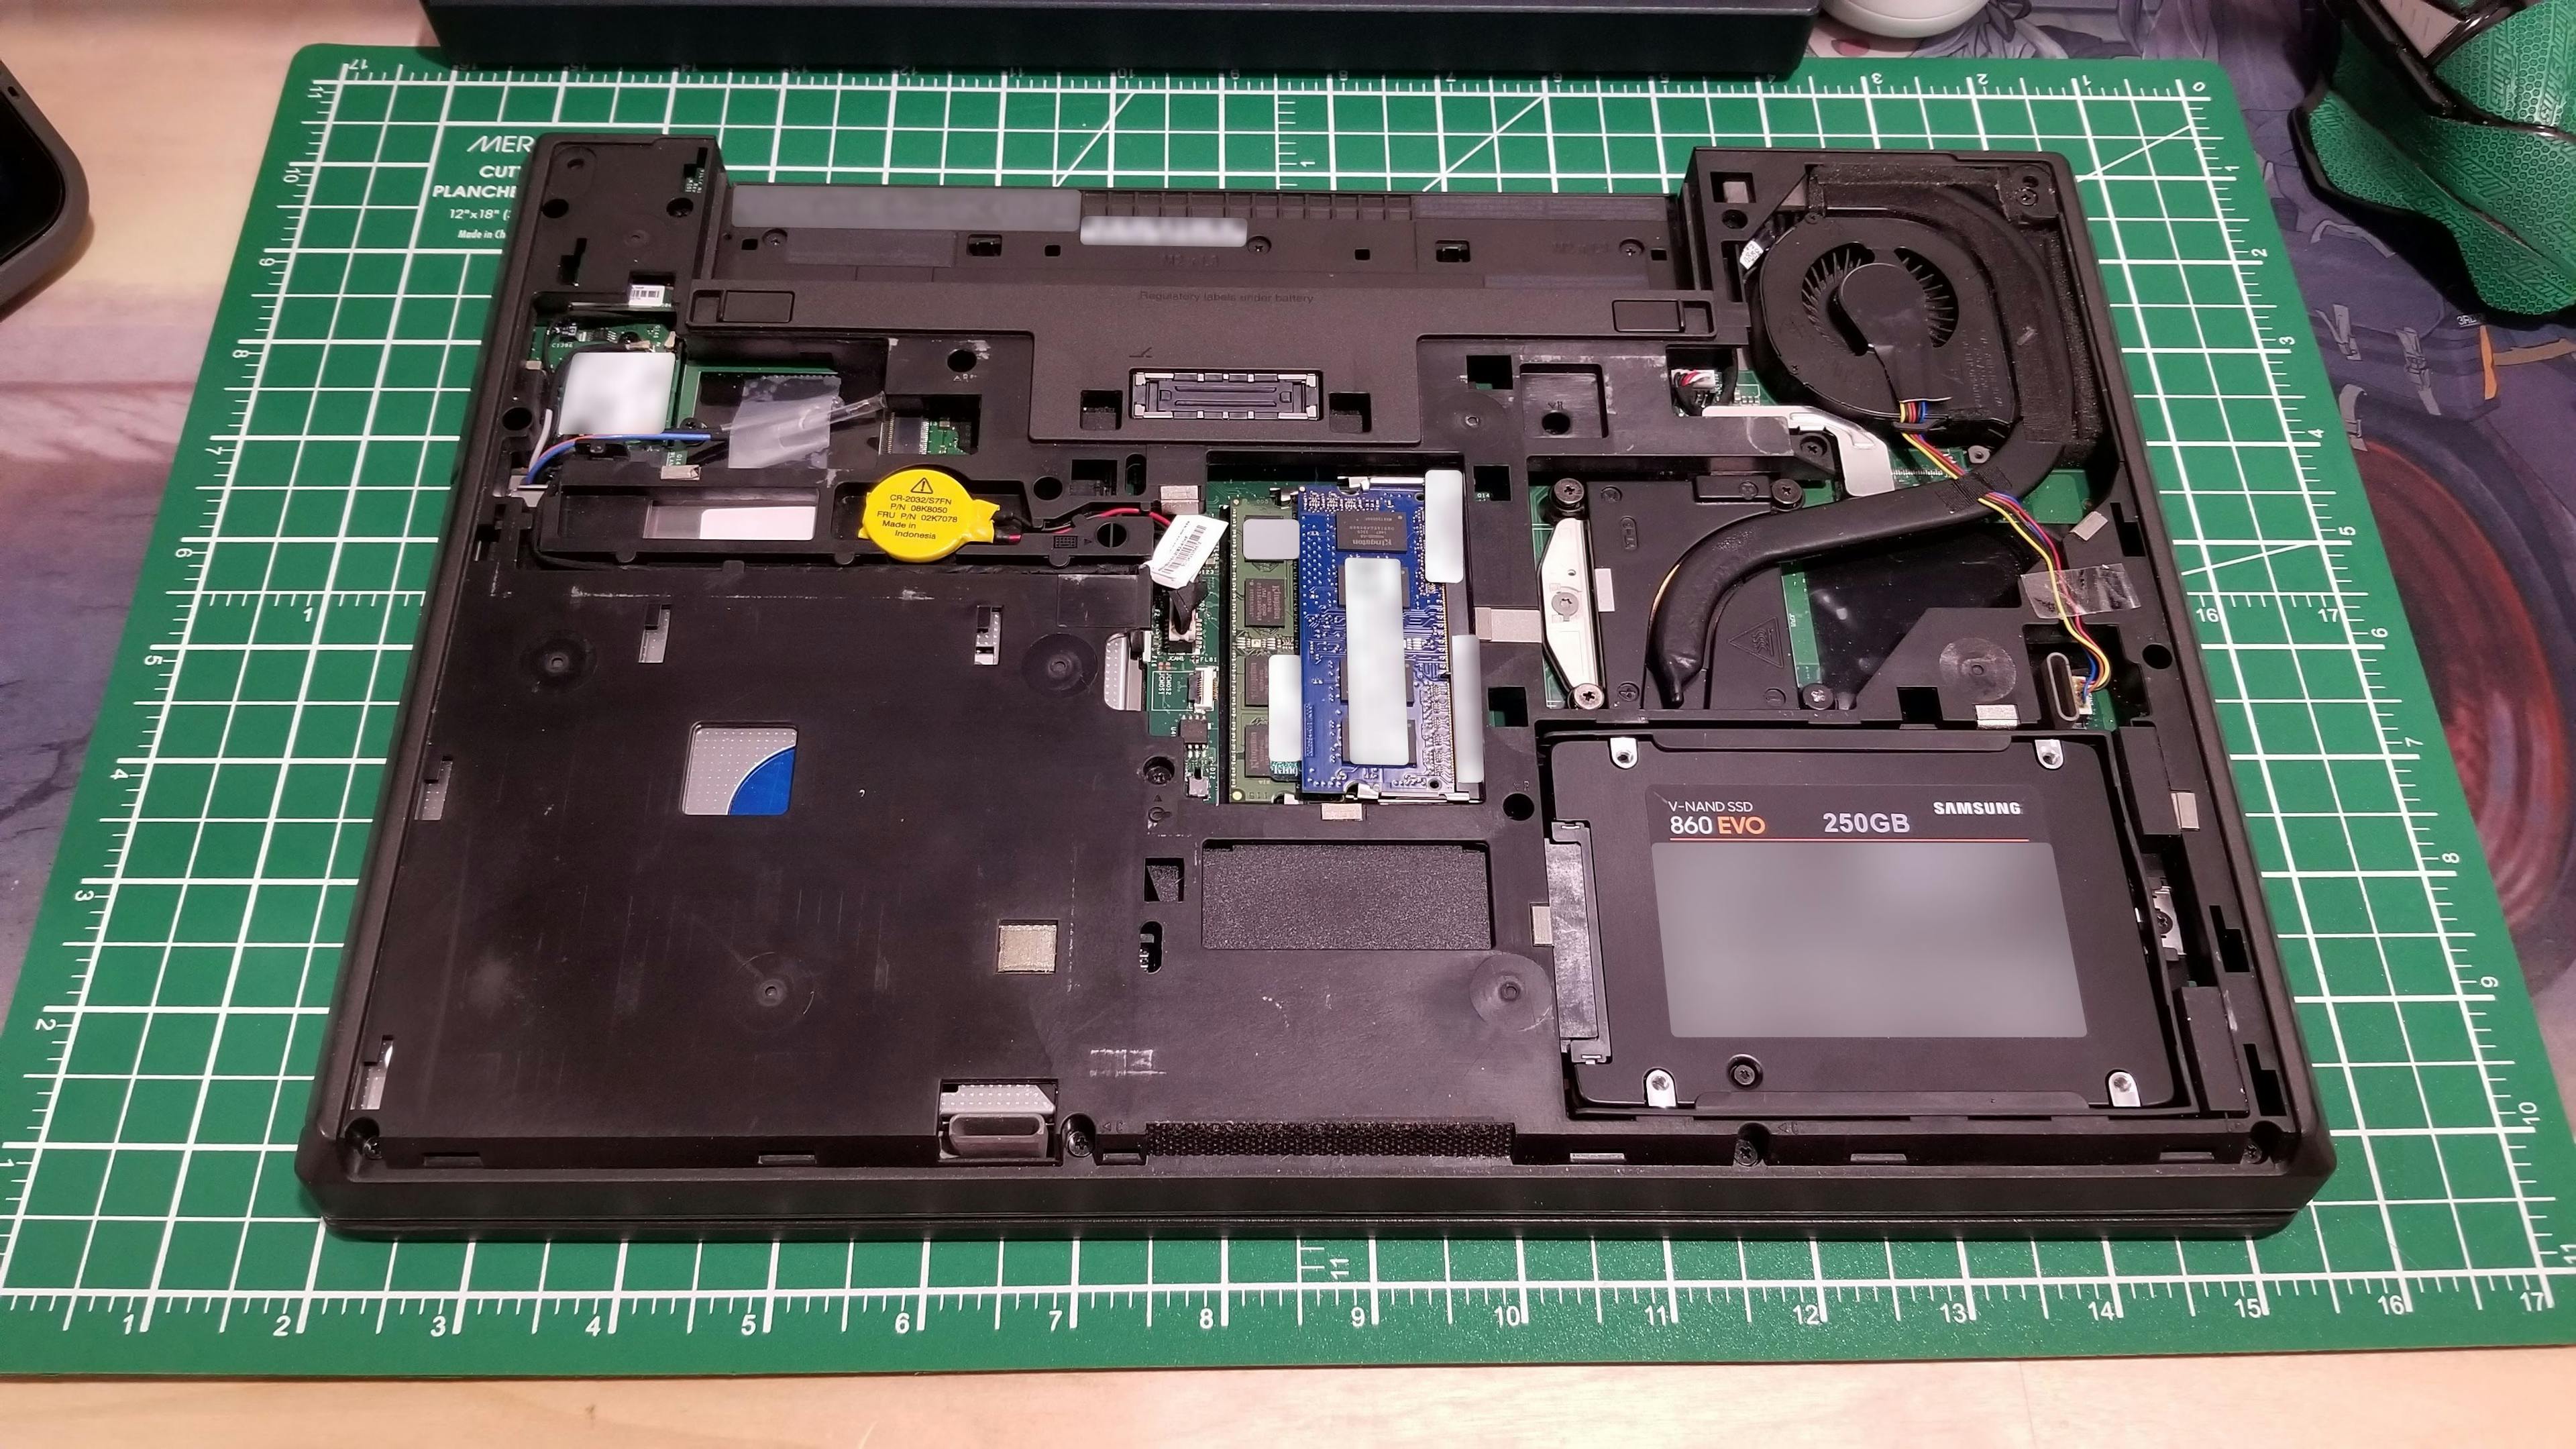 The service panel removed from the ThinkPad T440p.